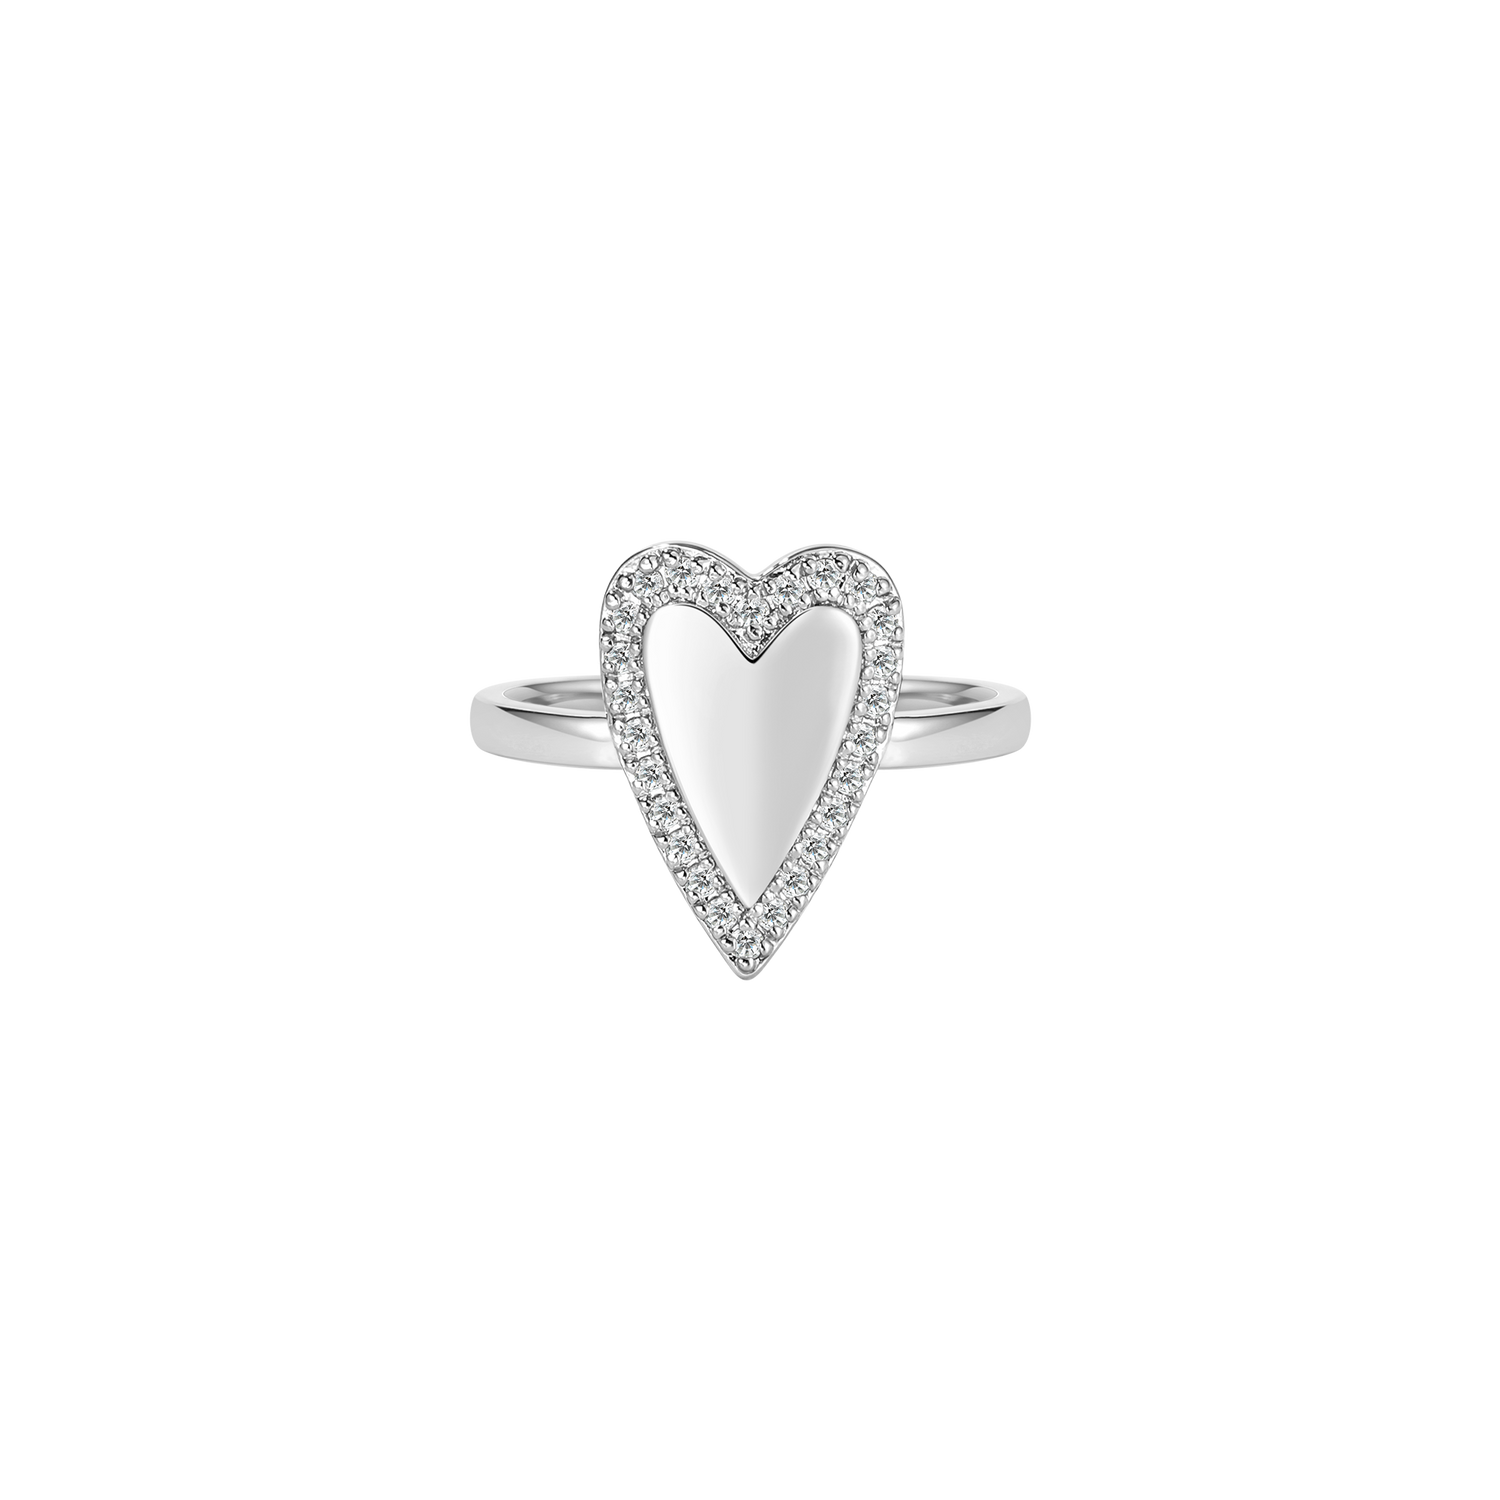 Solid Gold Heart Shaped Ring